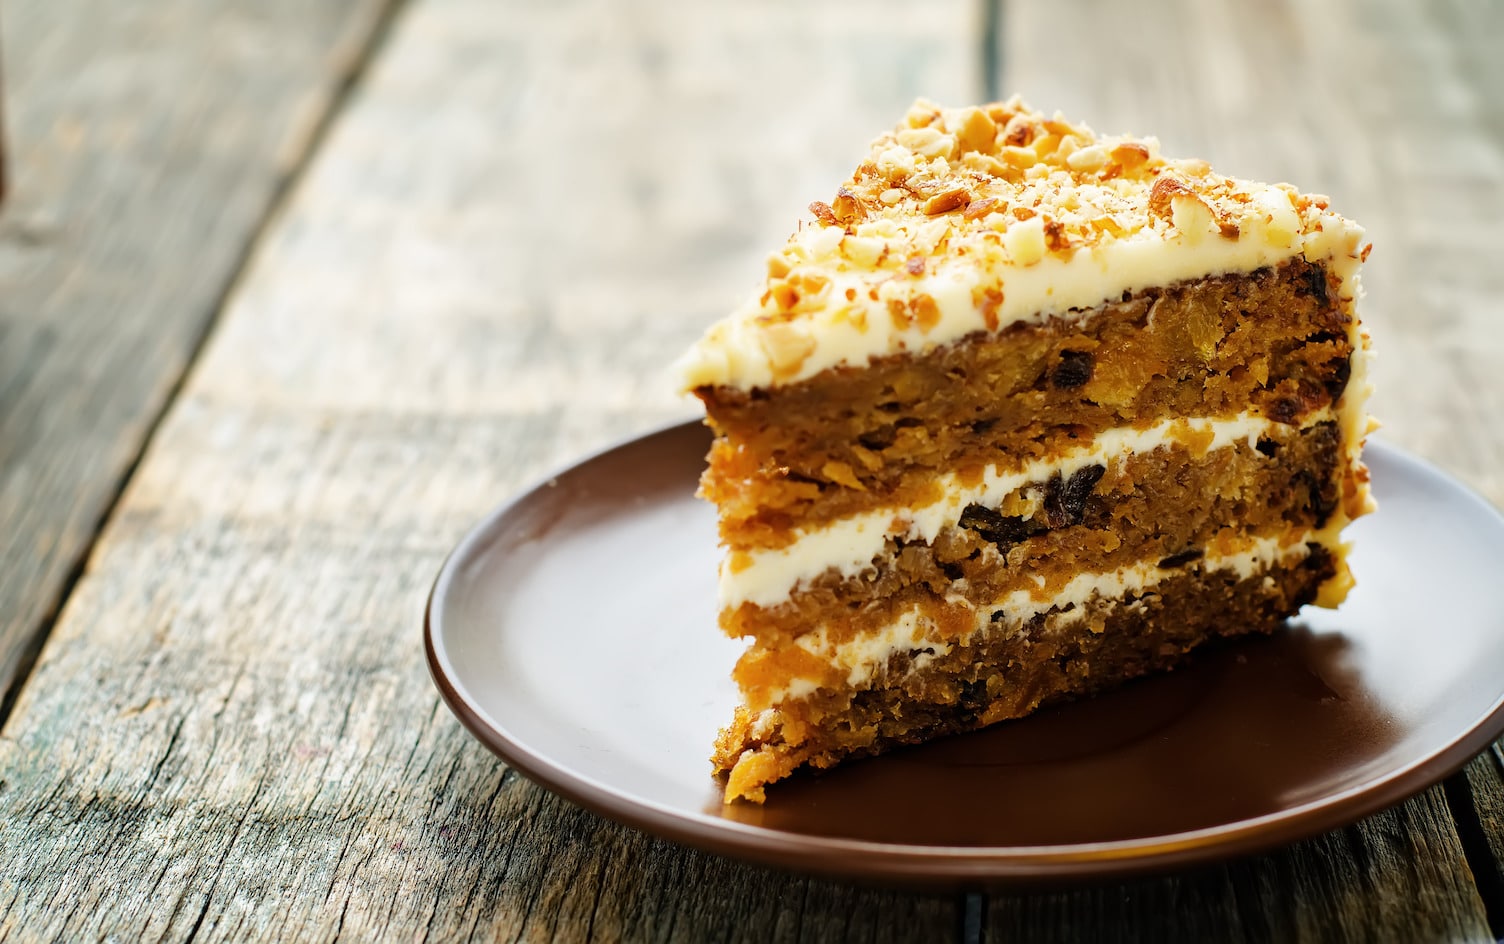 This Healthier Carrot Cake Recipe is Perfect For Spring | MyFitnessPal